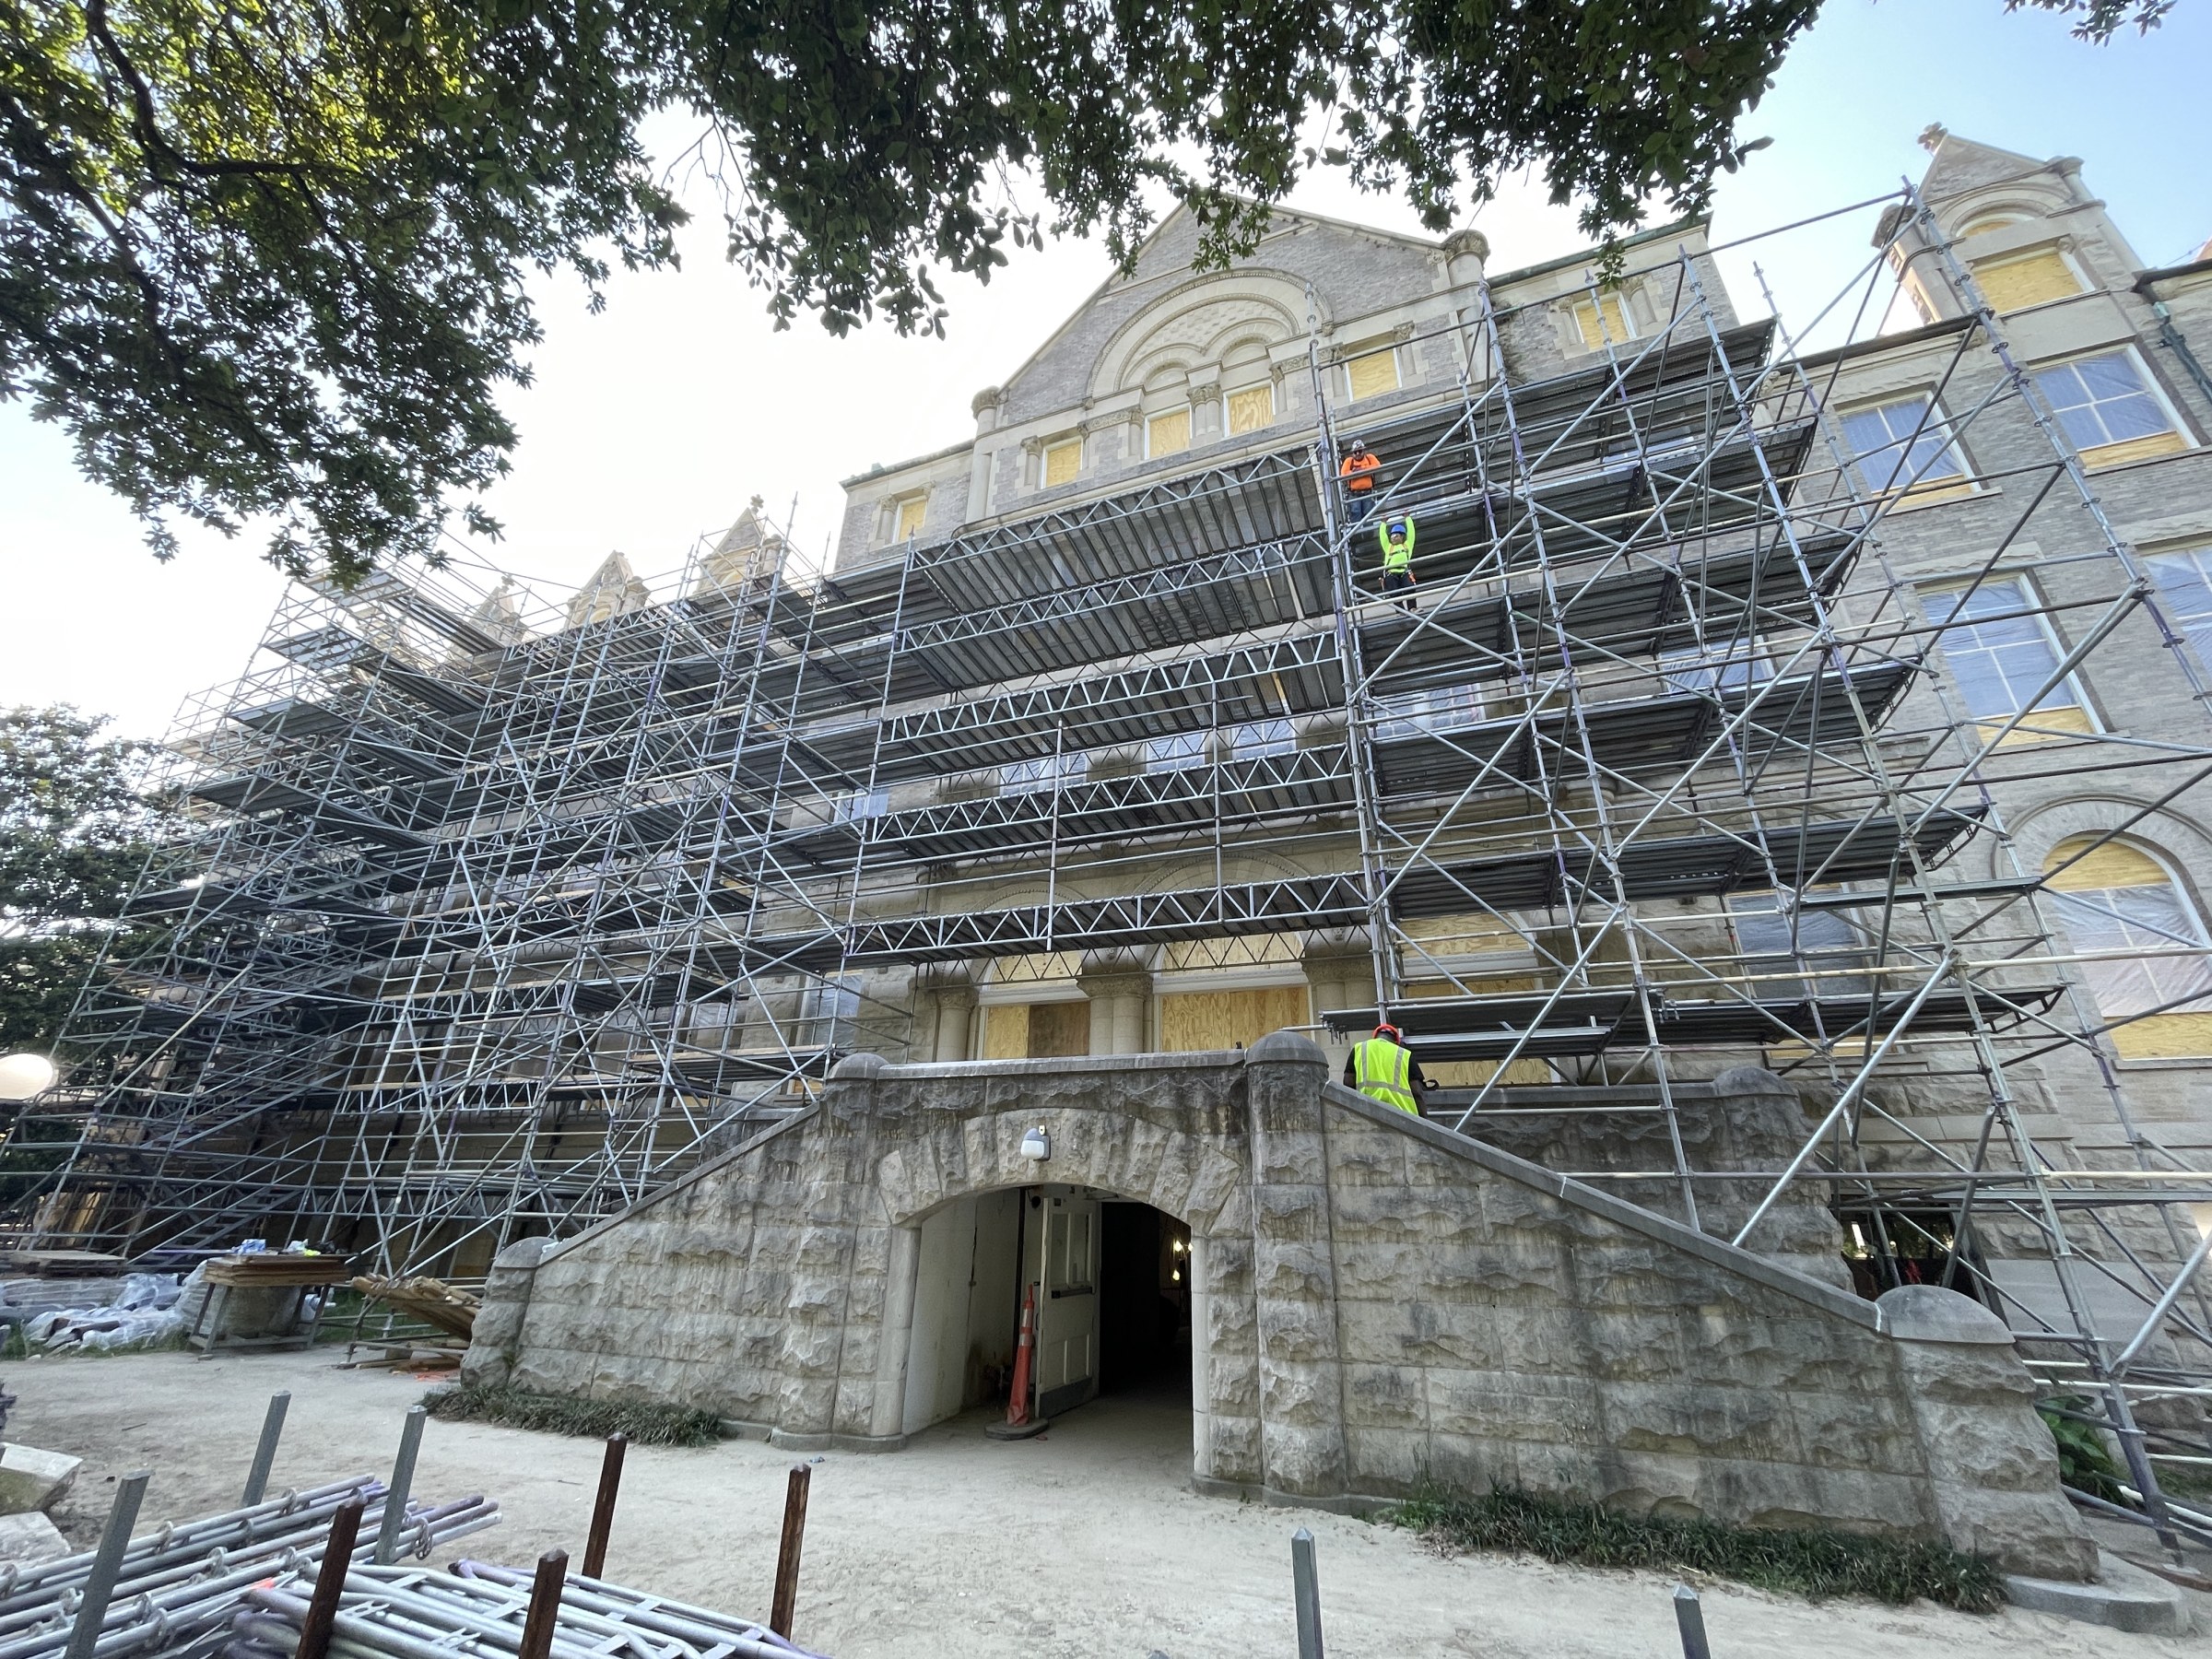 Exterior view of front facade of historic Richardson Memorial Hall with several stories of metal scaffolding built around the building's limestone facade.